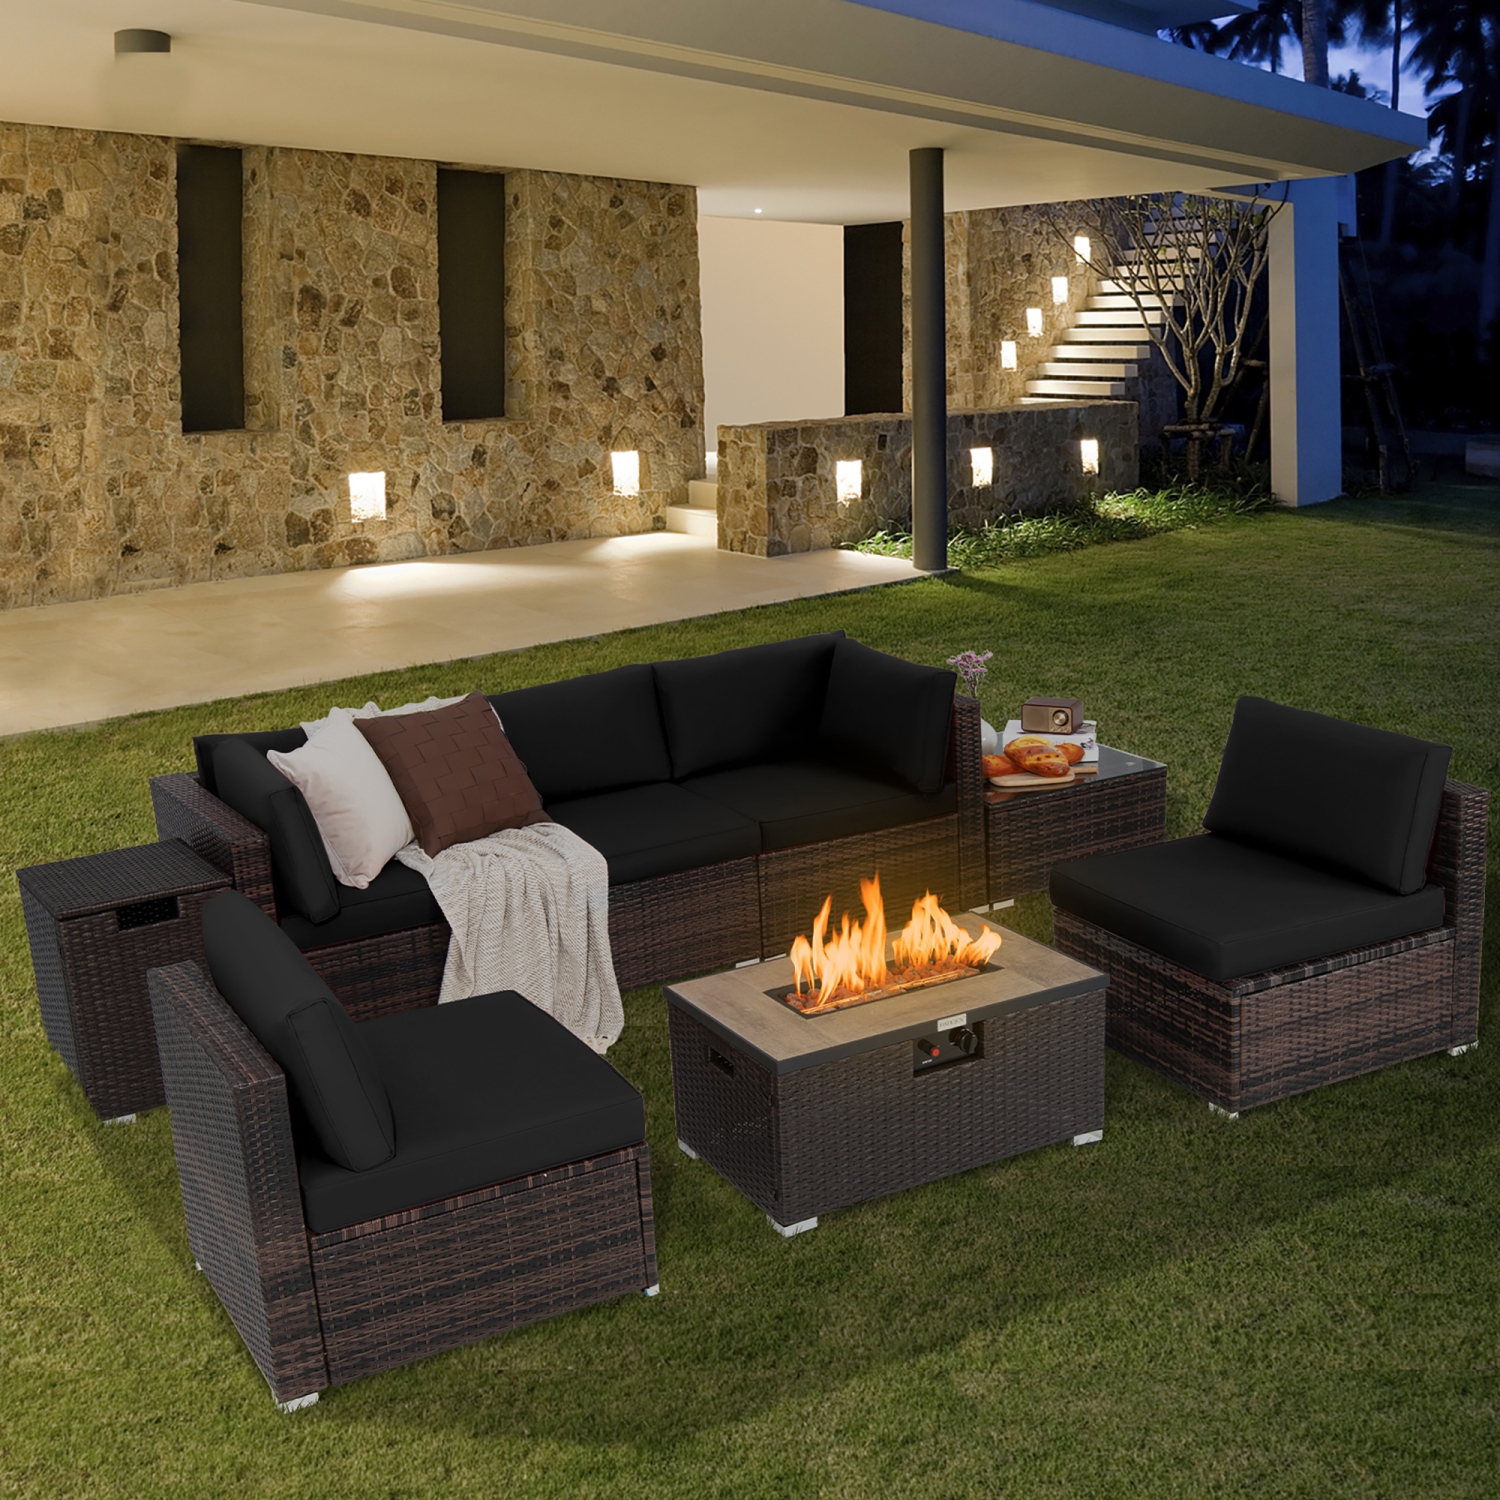 Patio conversational set with fire table